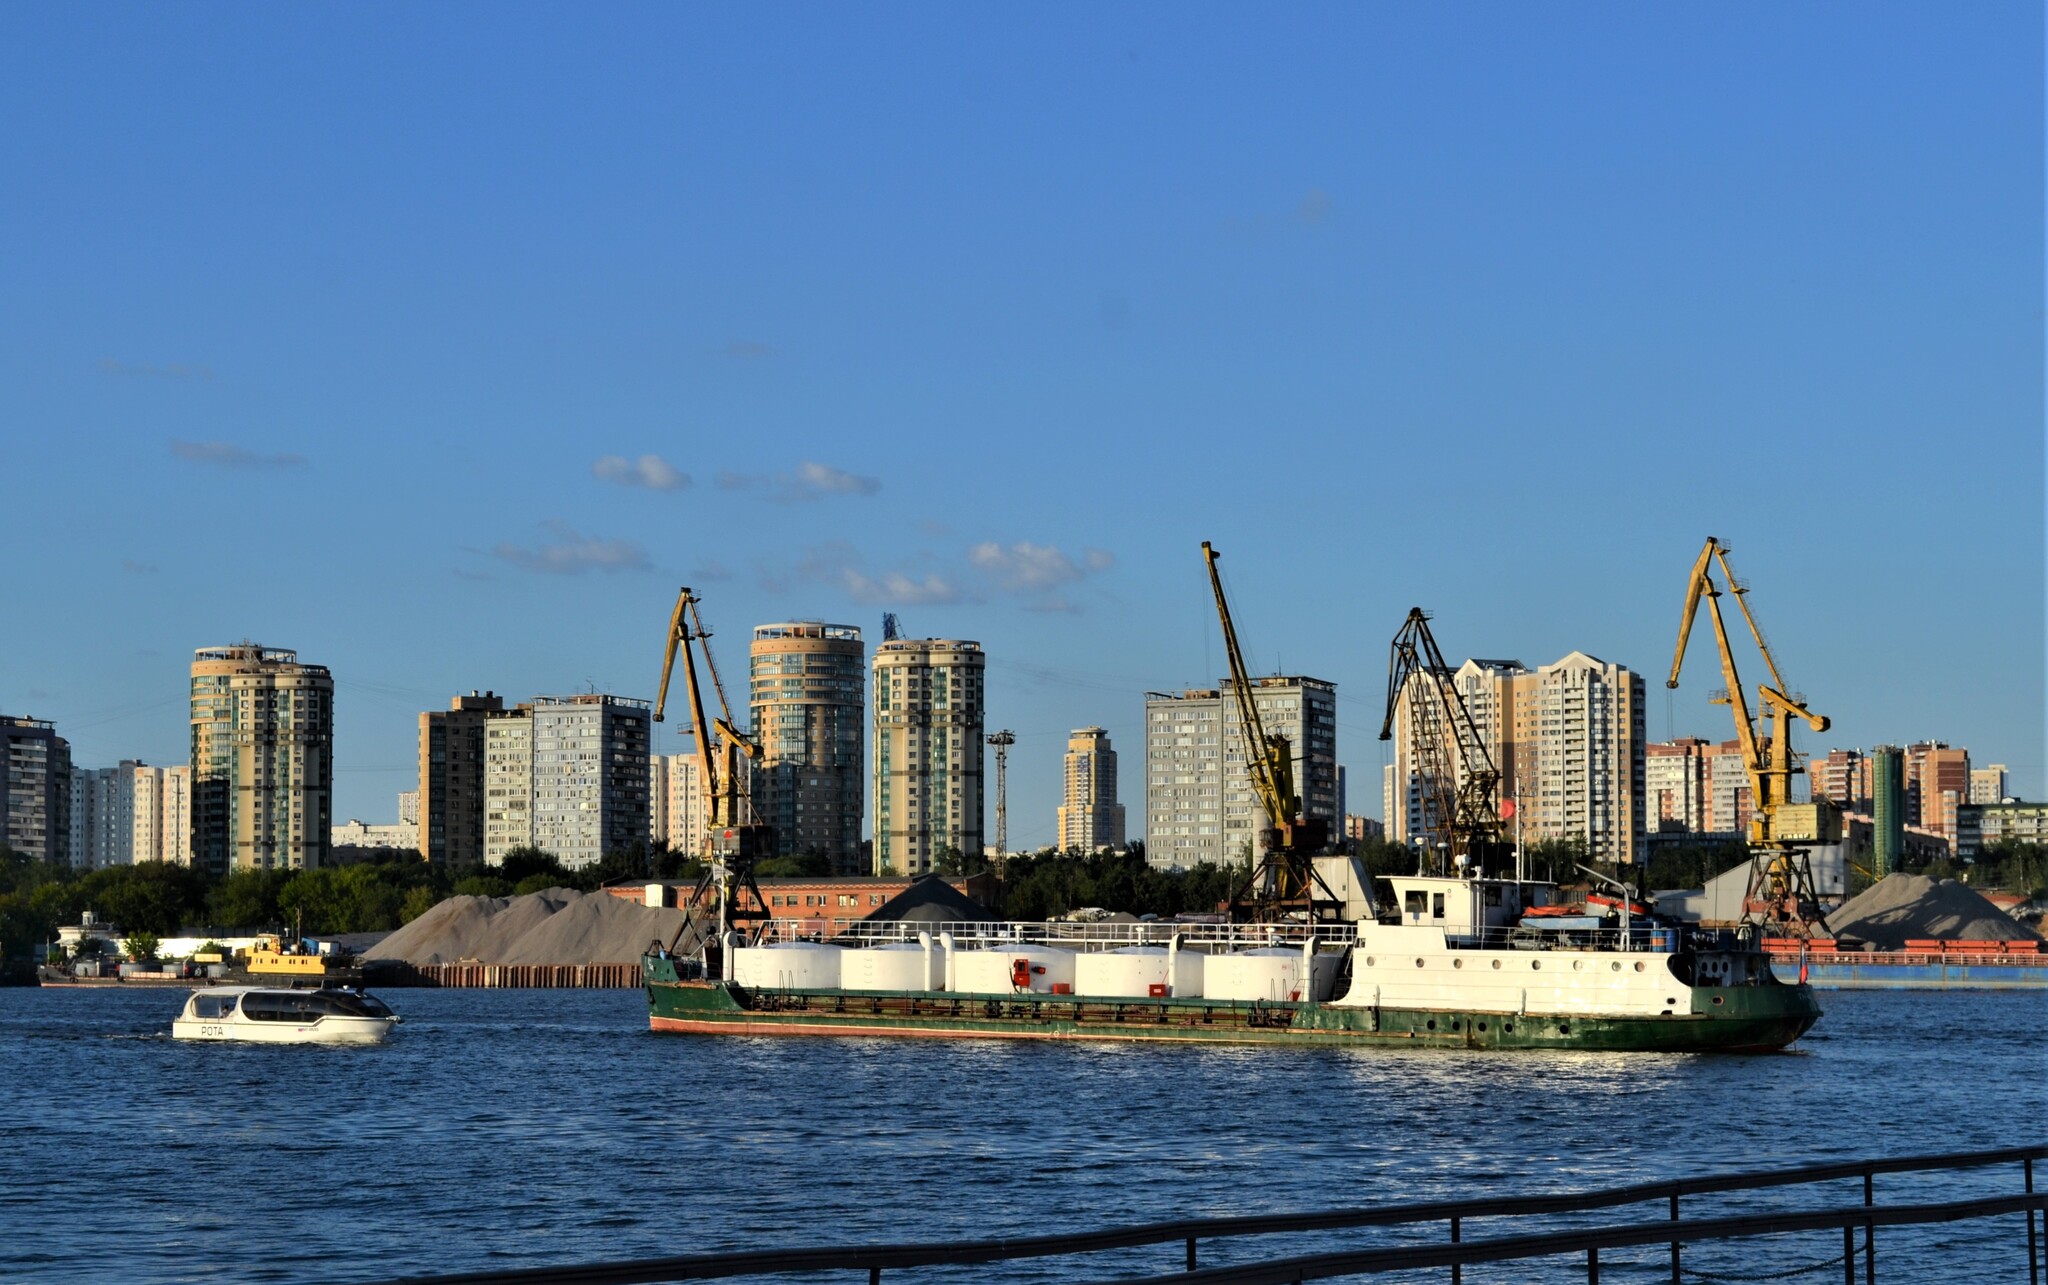 River station from the other side - My, The photo, Sky, Beginning photographer, Nikon, Moscow River, Moscow, Tushino, Barge, River Station, Longpost